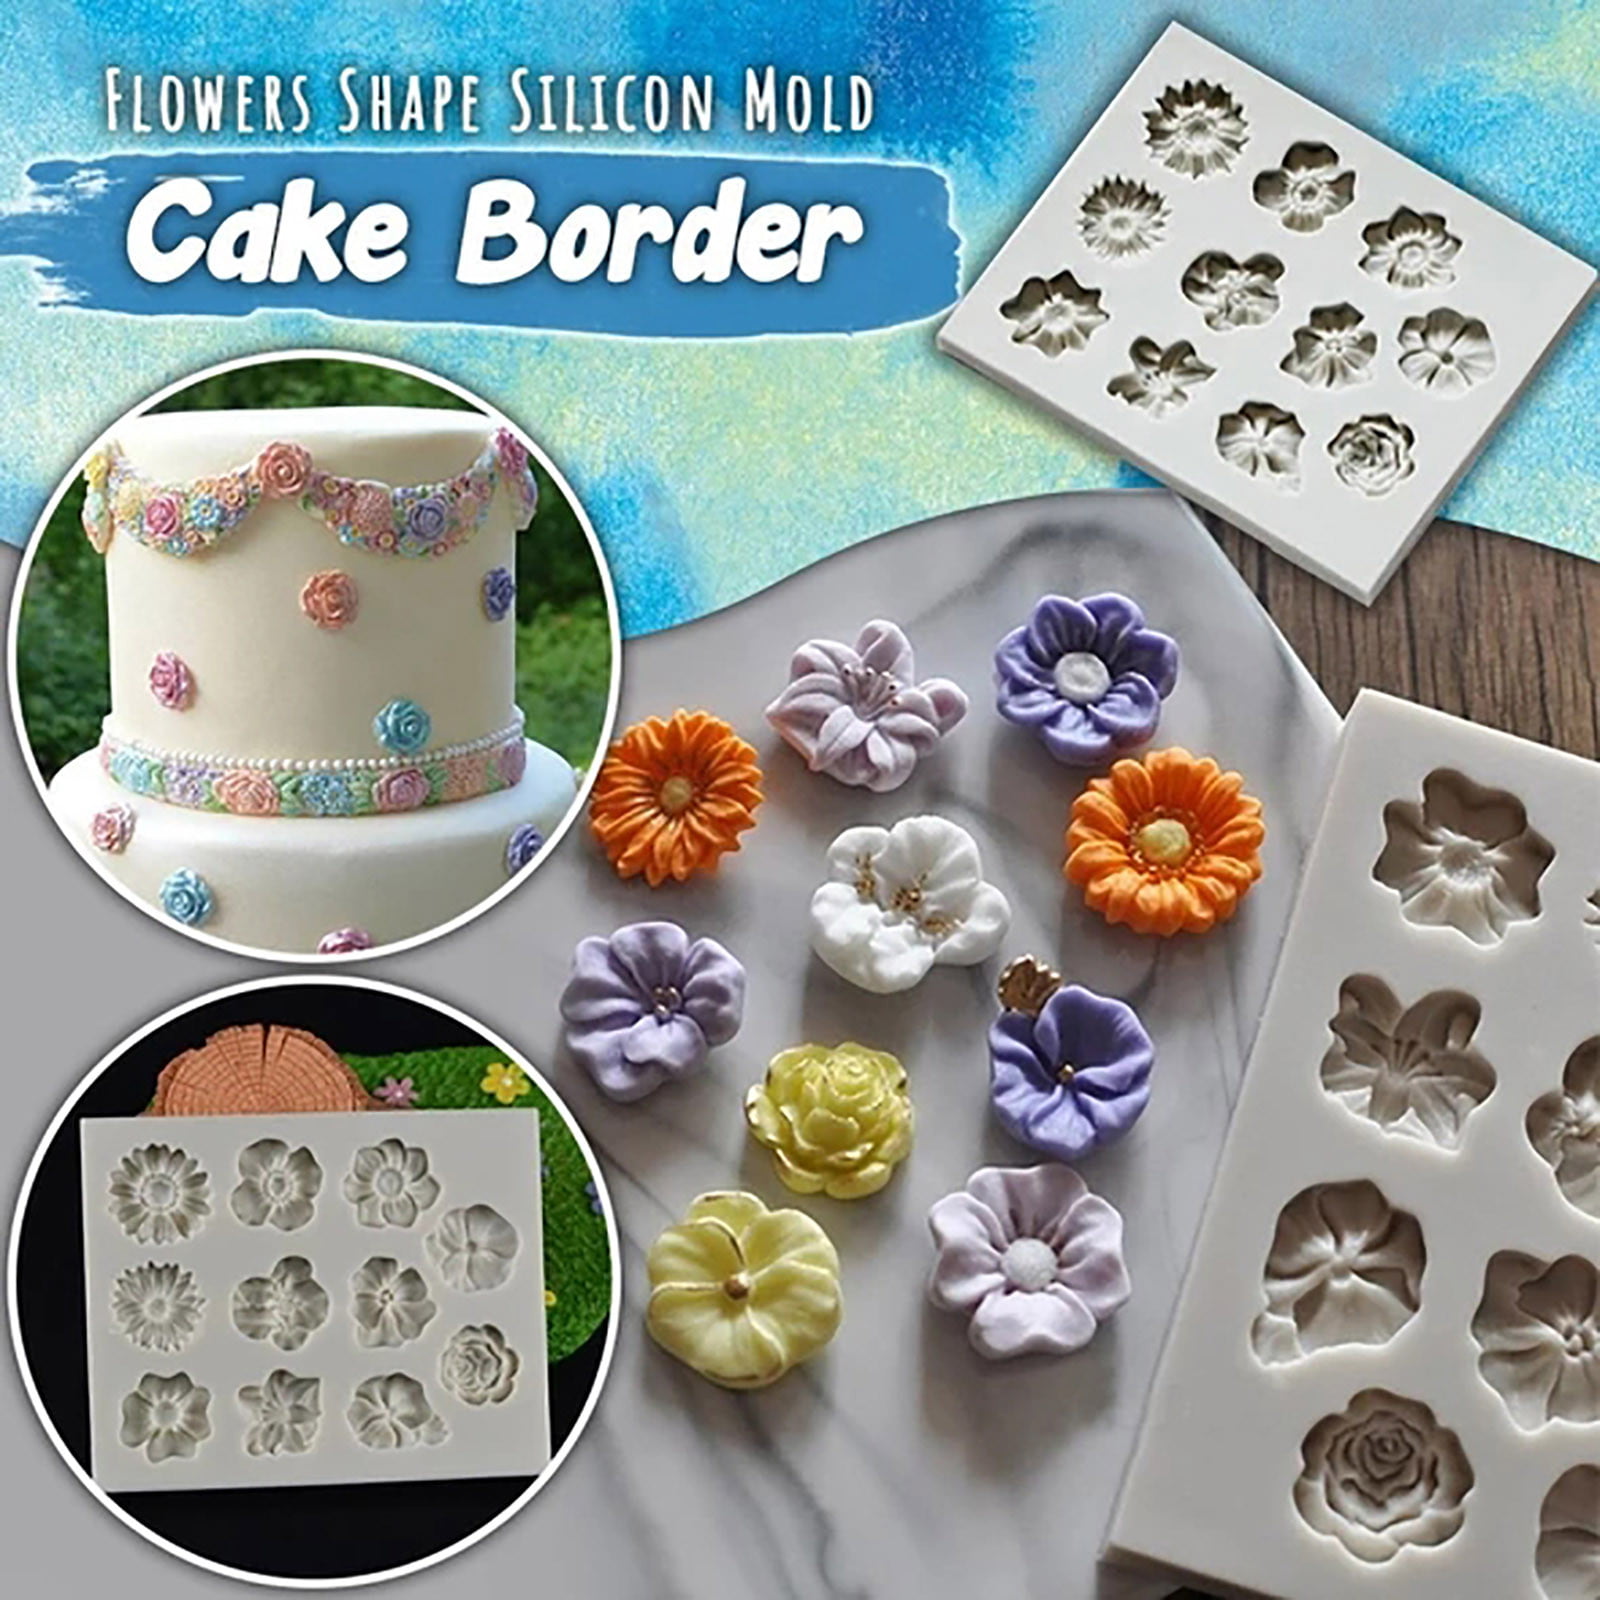 Small flower 15mm Flexible silicone mold for fondant chocolate clay and more 